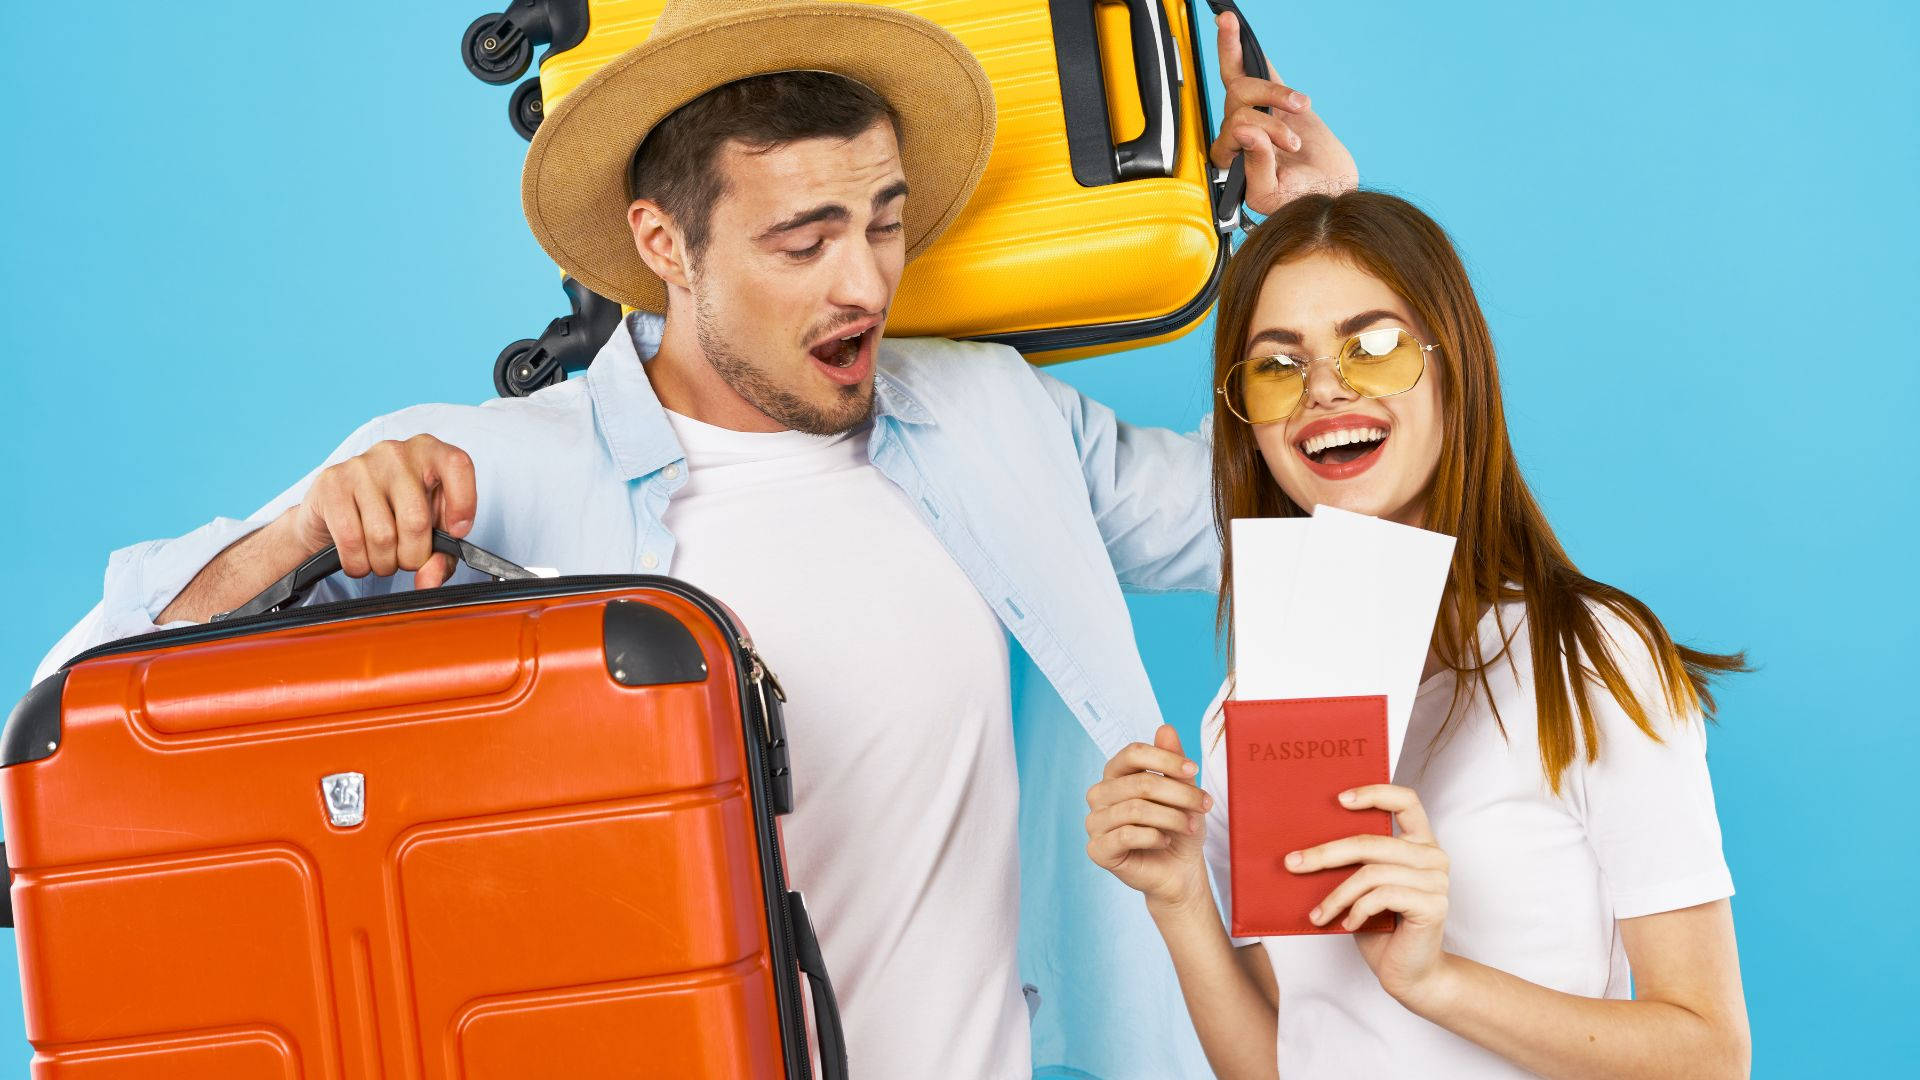 Couple With Suitcase And Passport Wallpaper